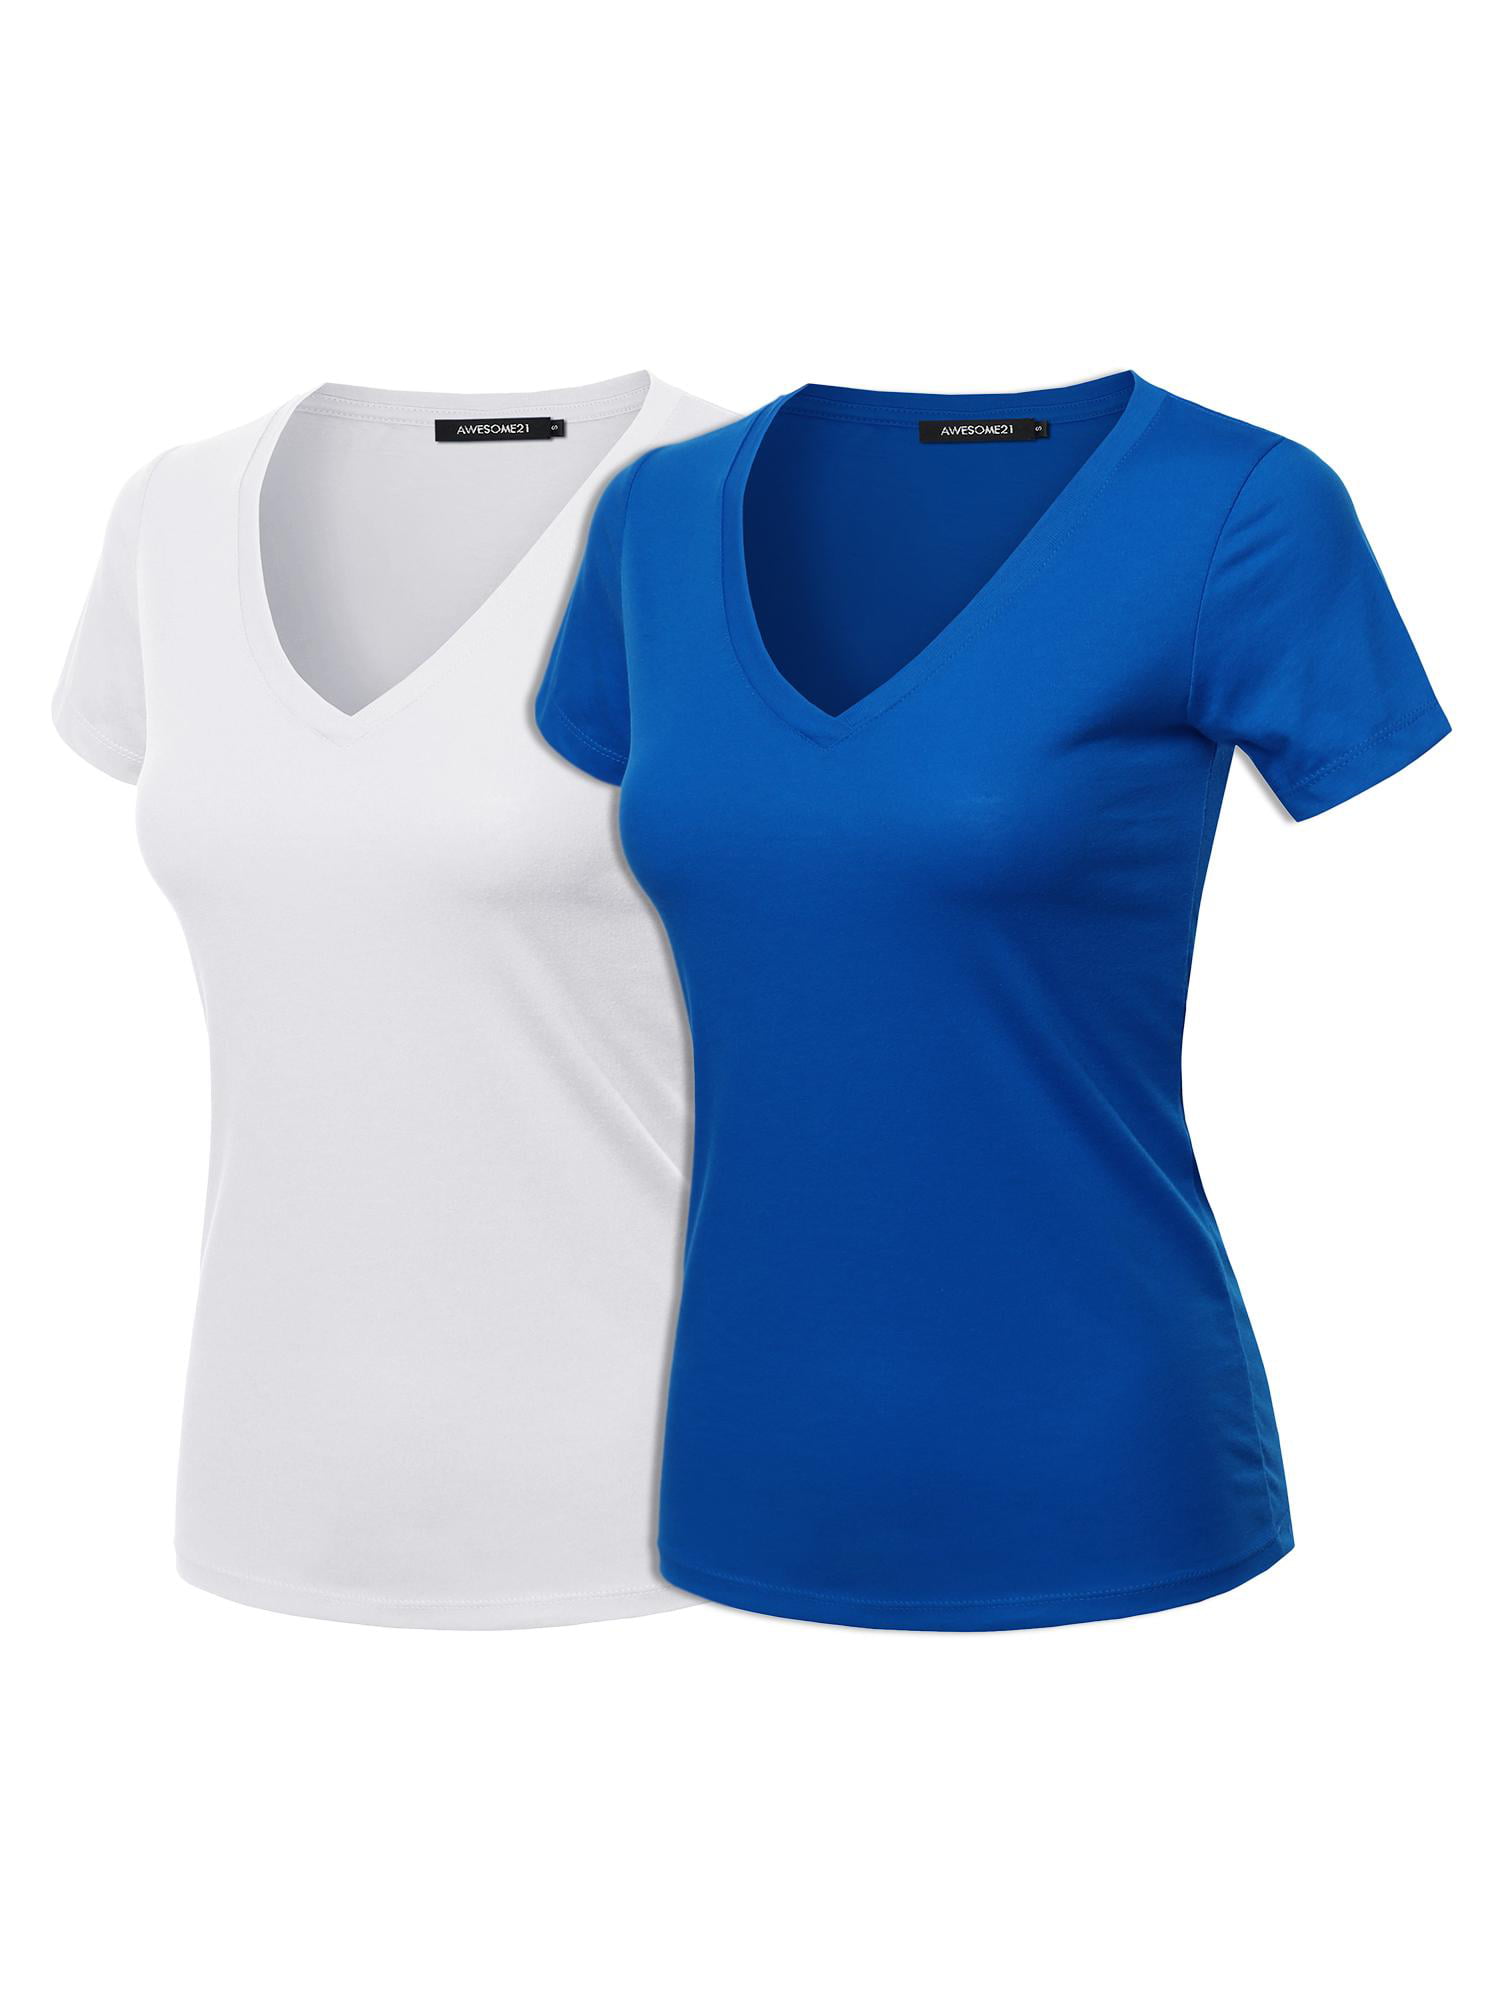 Awesome21 Womens Basic Stripe V-Neck T-Shirt with 3/4 Sleeves 